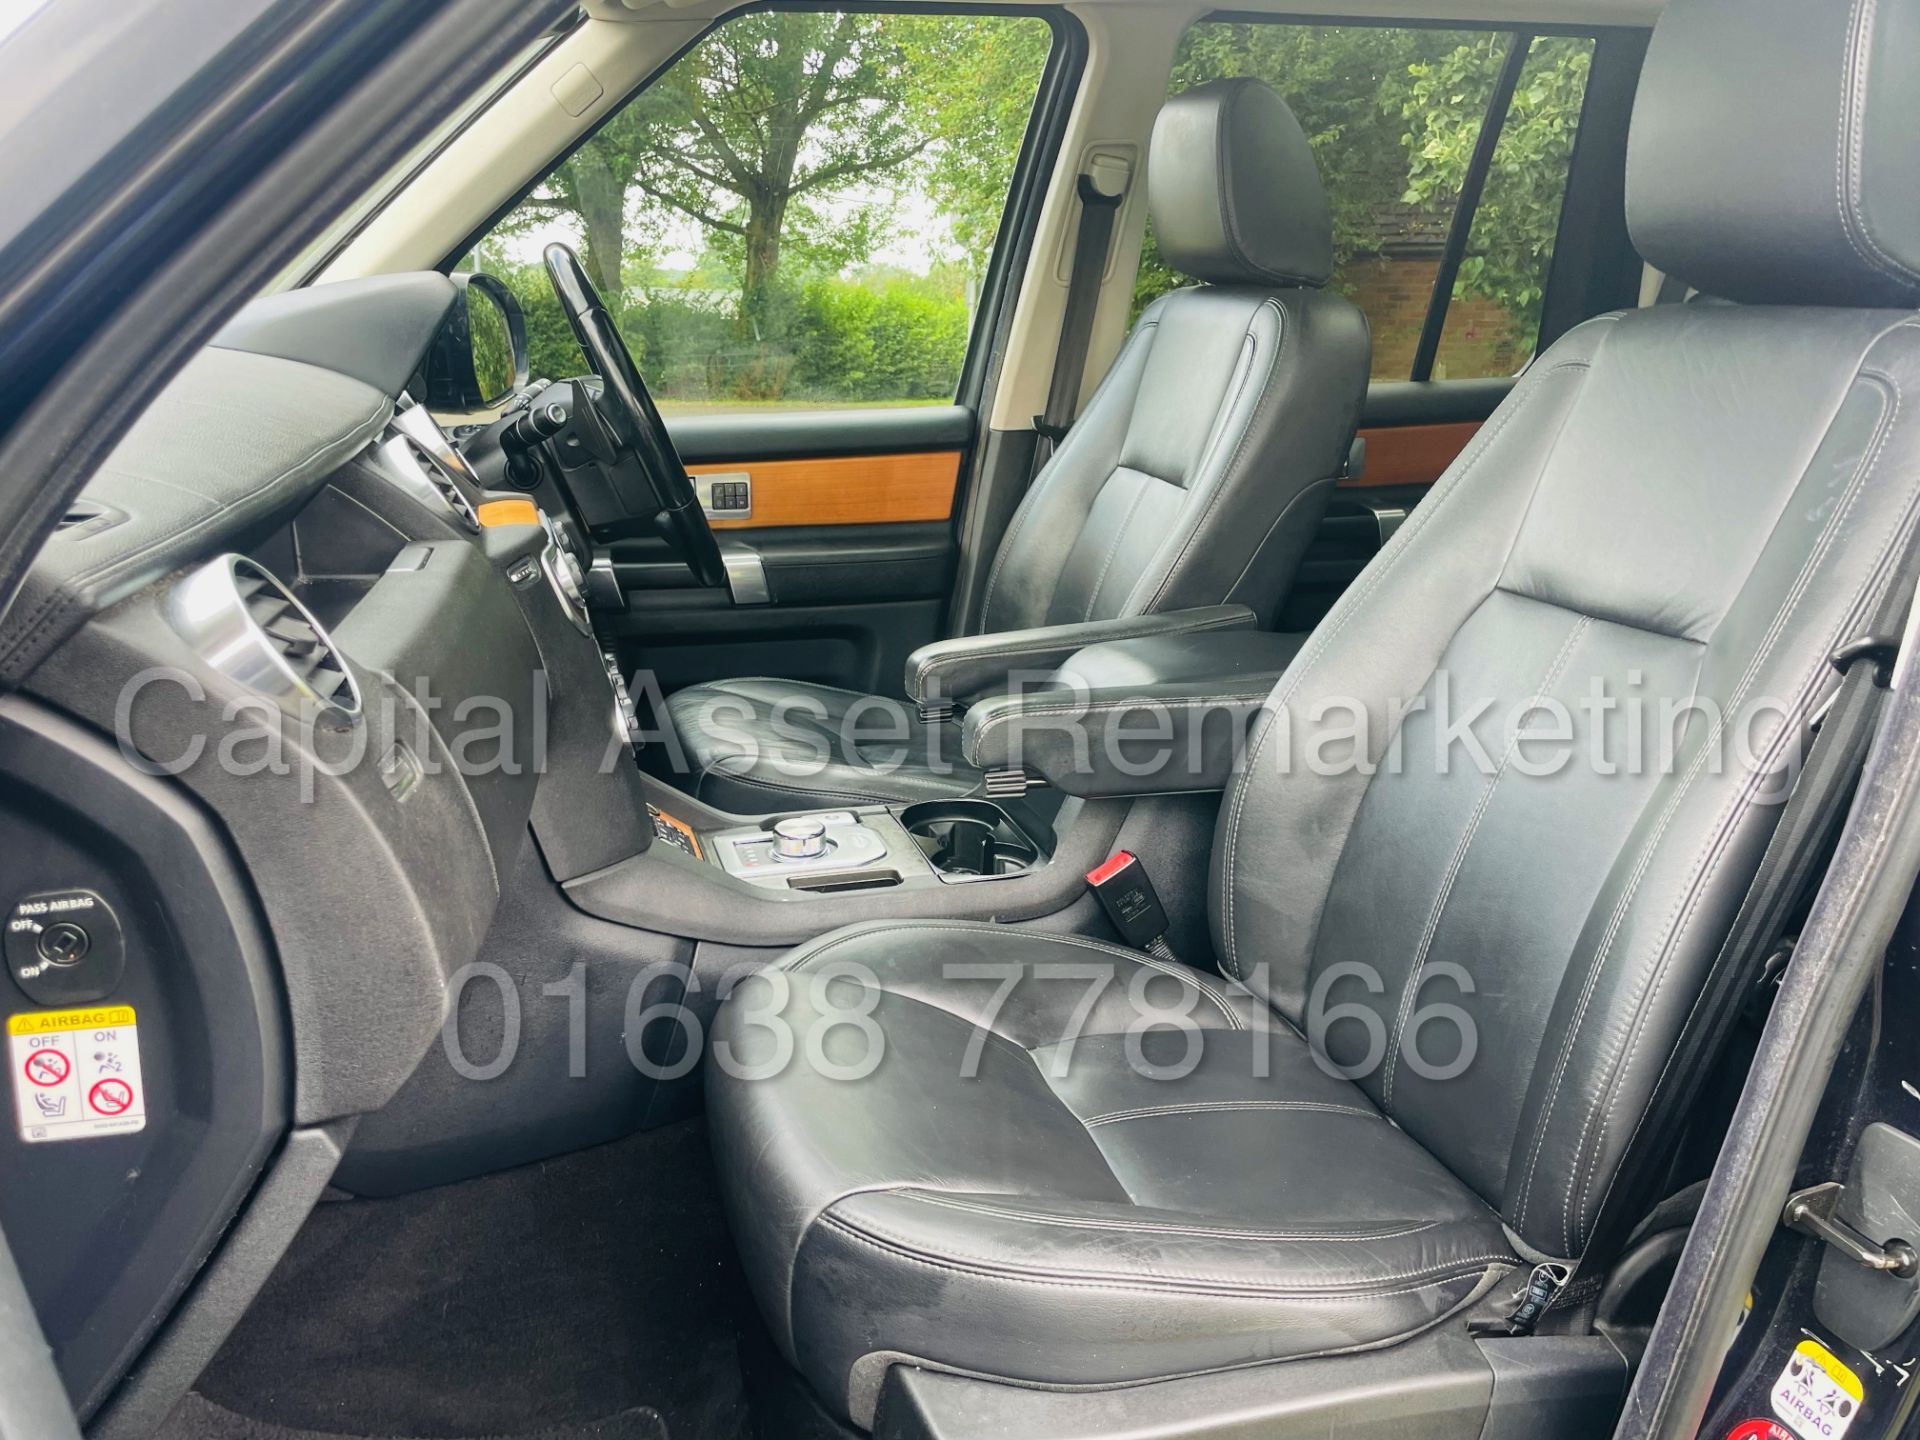 LAND ROVER DISCOVERY 4 *HSE* 7 SEATER SUV (2014 - NEW MODEL) '3.0 SDV6 - 255 BHP - 8 SPEED AUTO' - Image 26 of 61